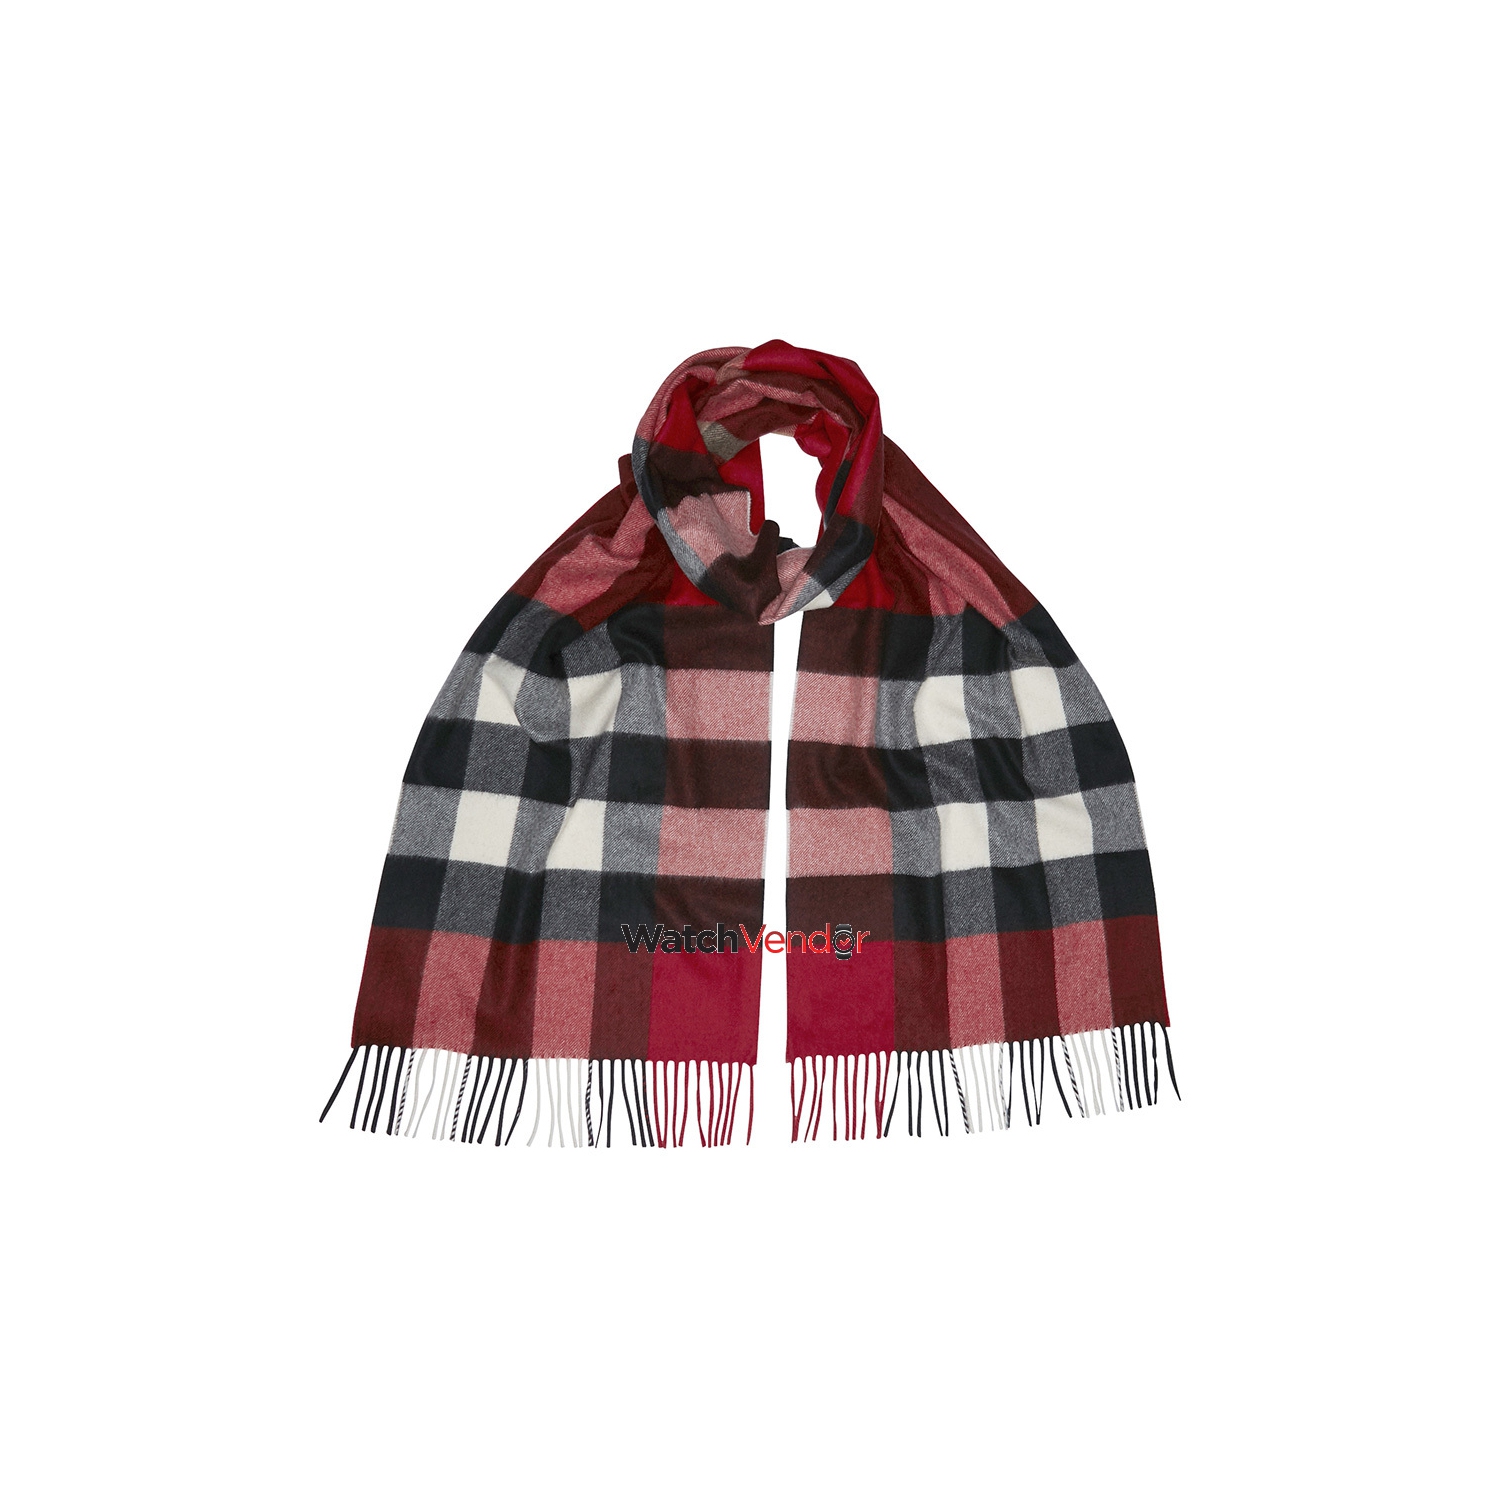 Burberry The Large Classic Cashmere Scarf in Check - Parade Red Check